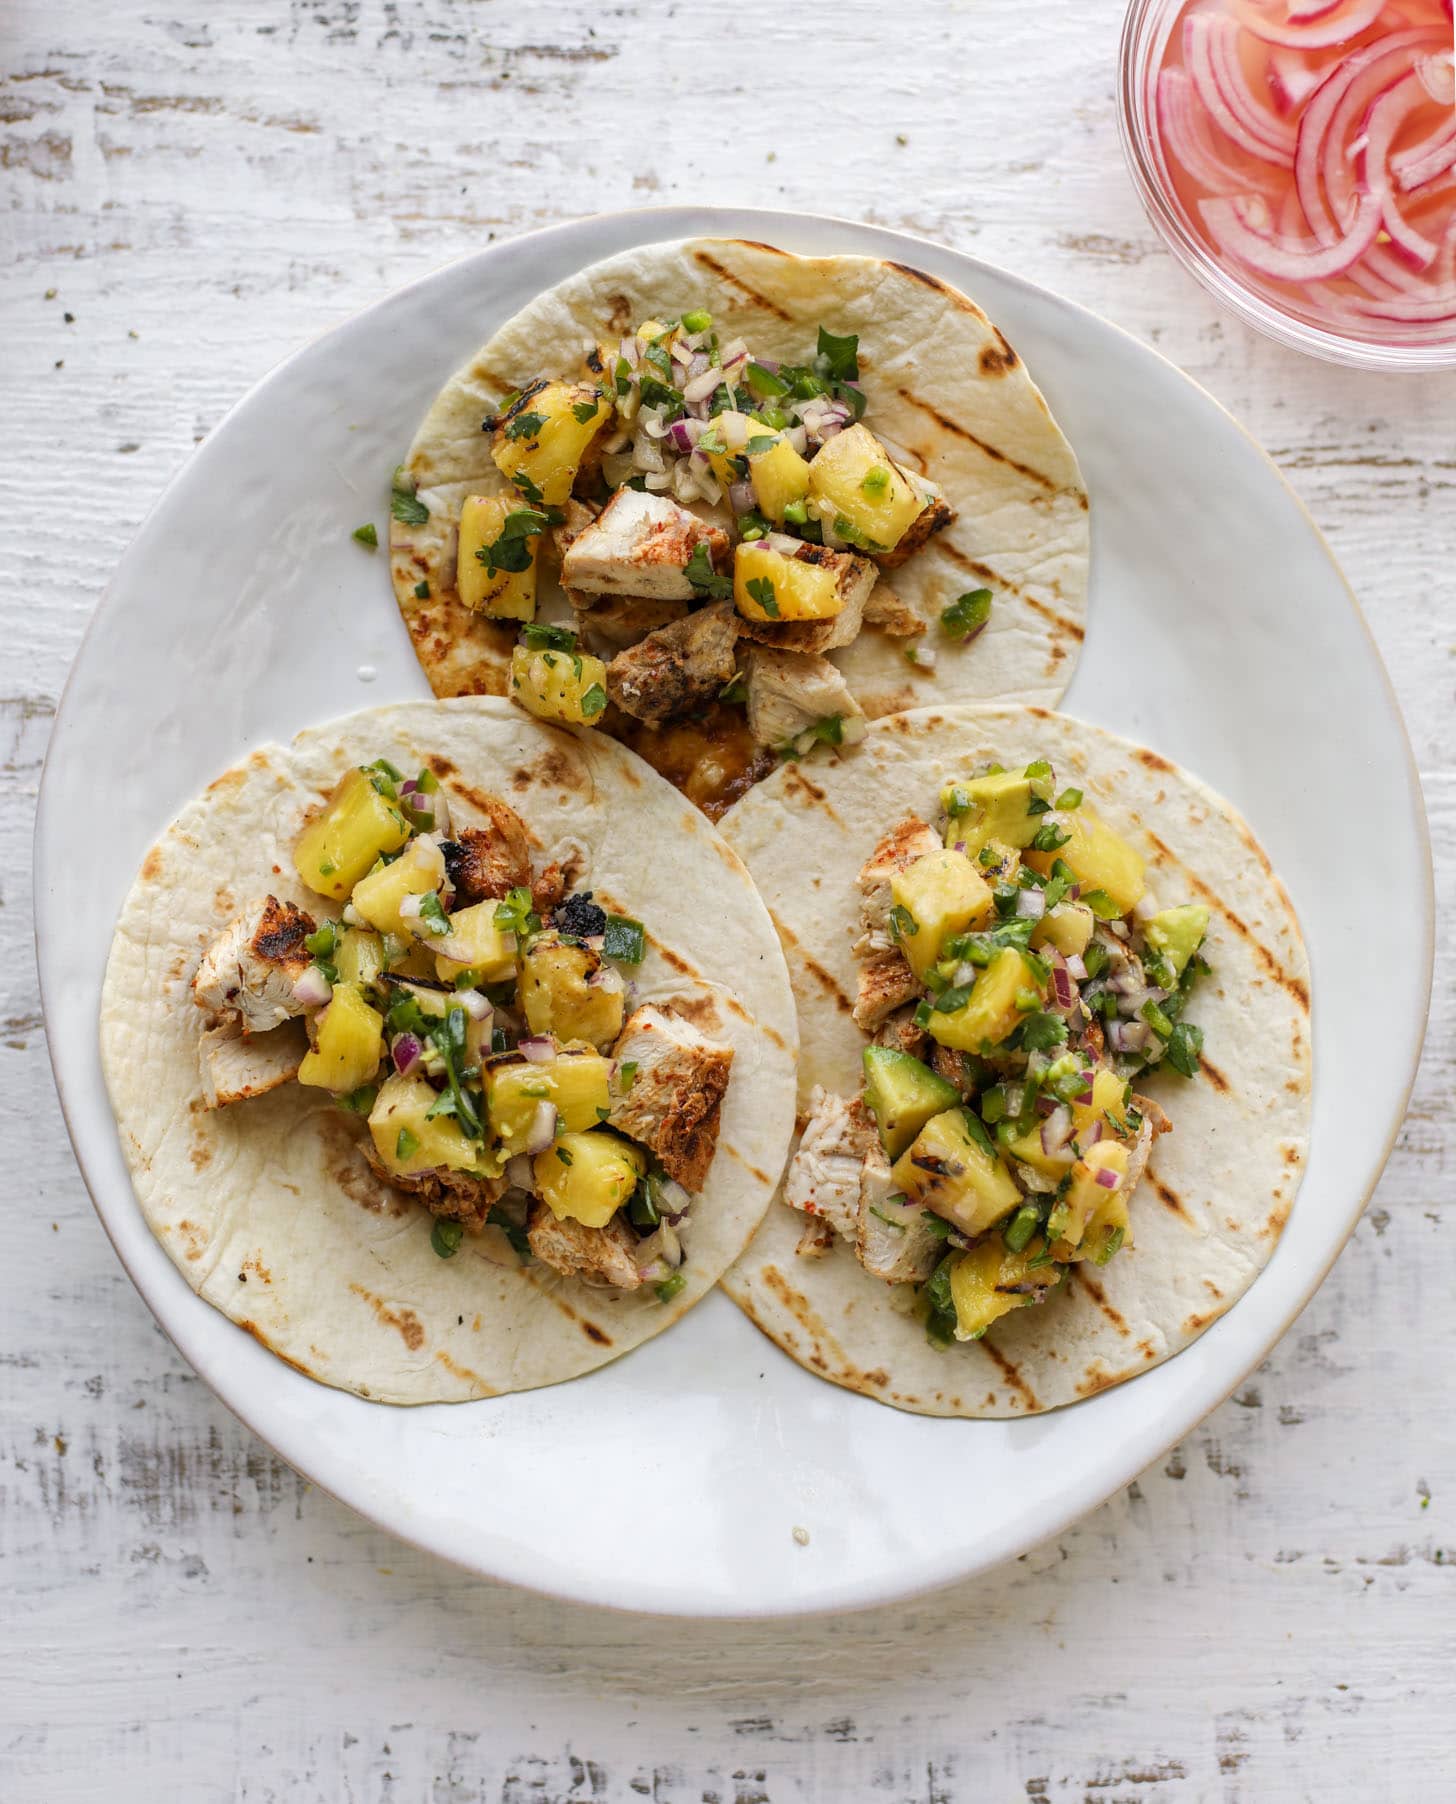 grilled chili lime chicken tacos with pineapple salsa